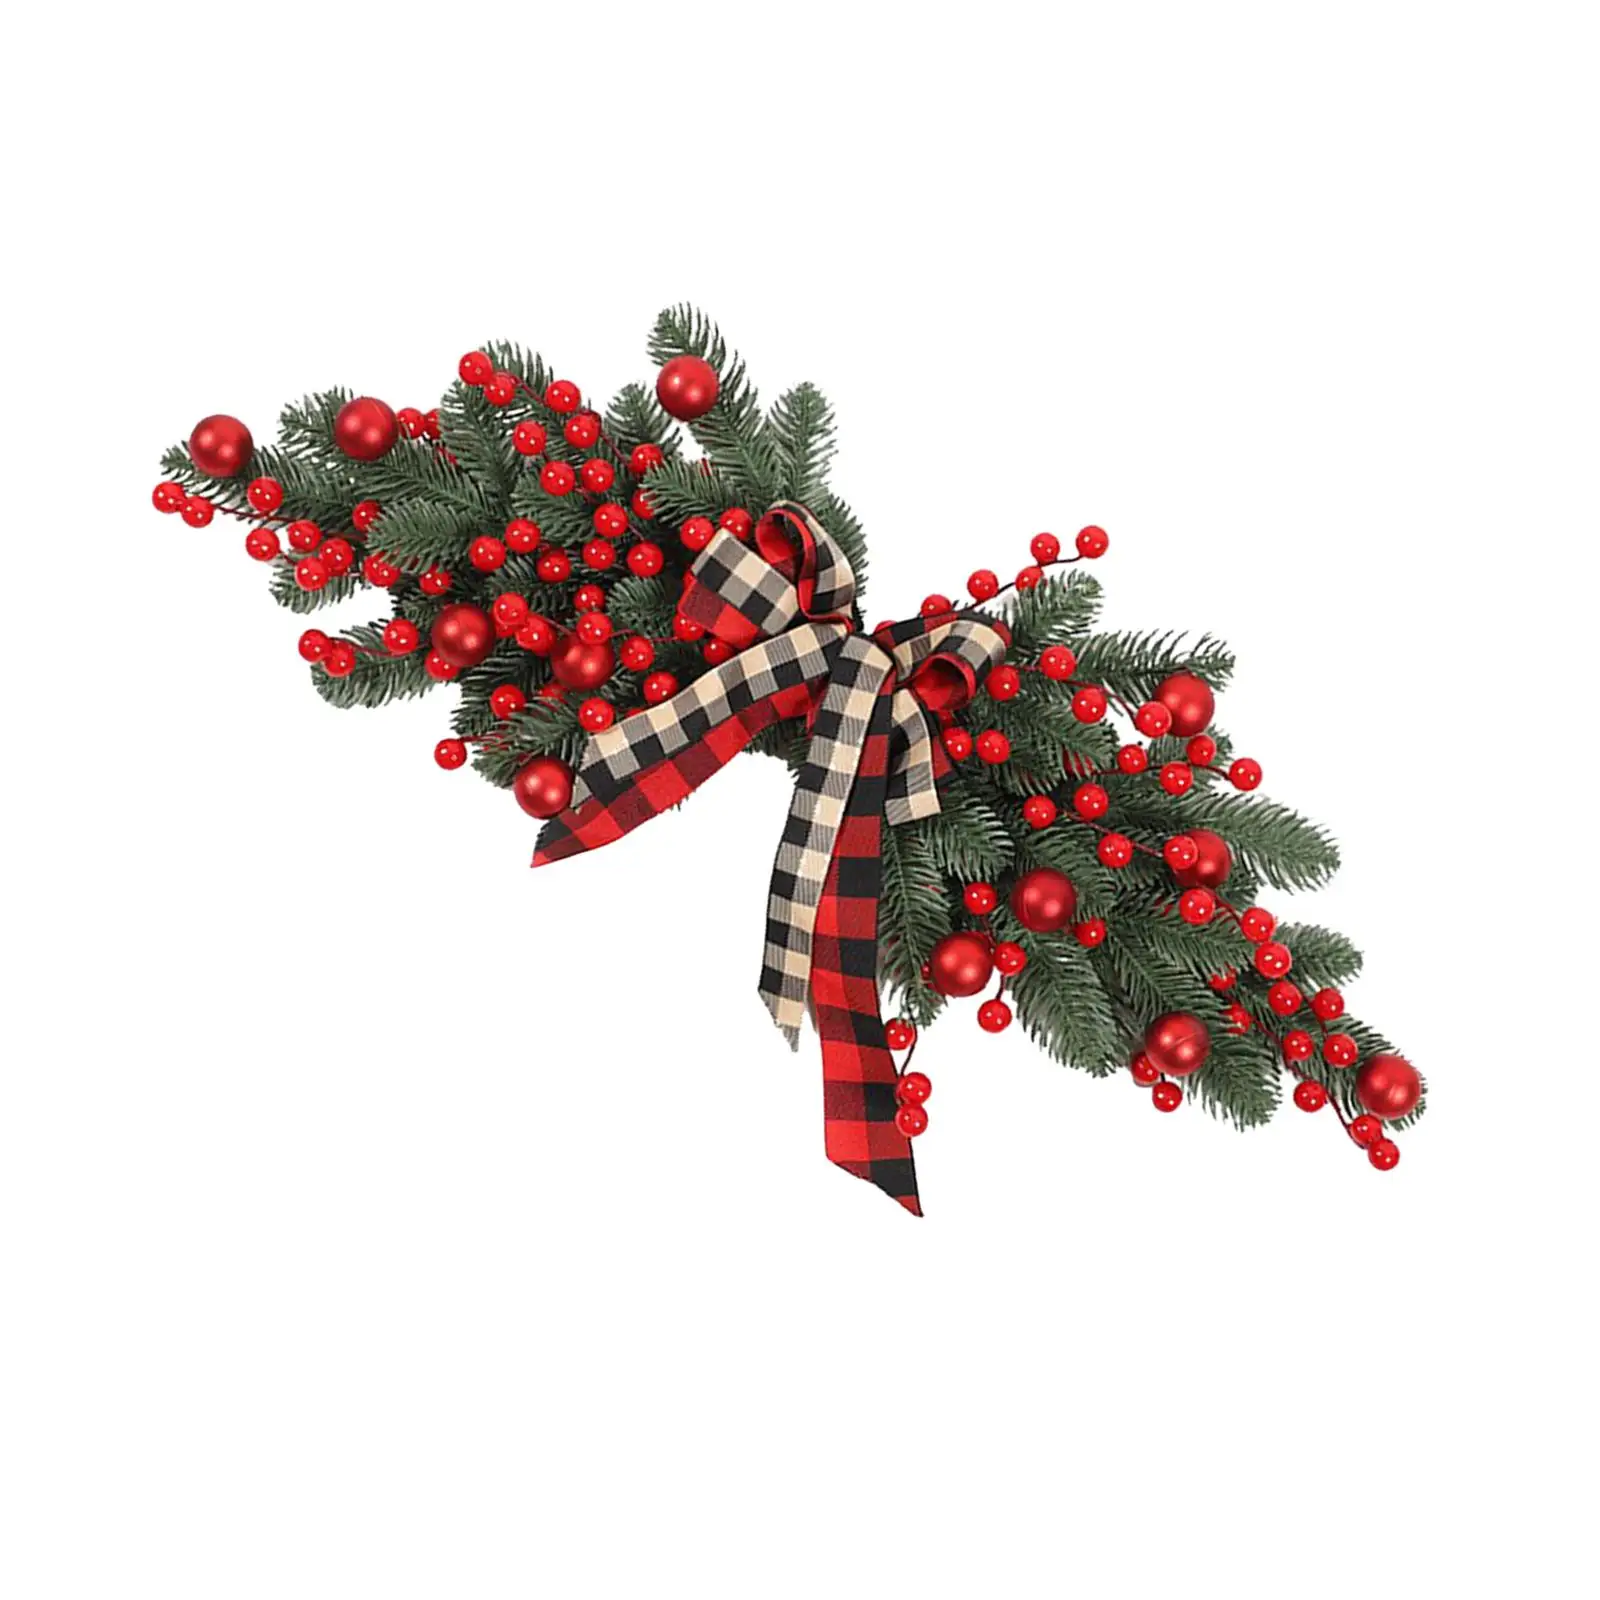 Christmas Wreath Wall Hanging Artificial Red Berries Branch Wreath Xmas Garland for Festival Xmas Garden New Year Farmhouse